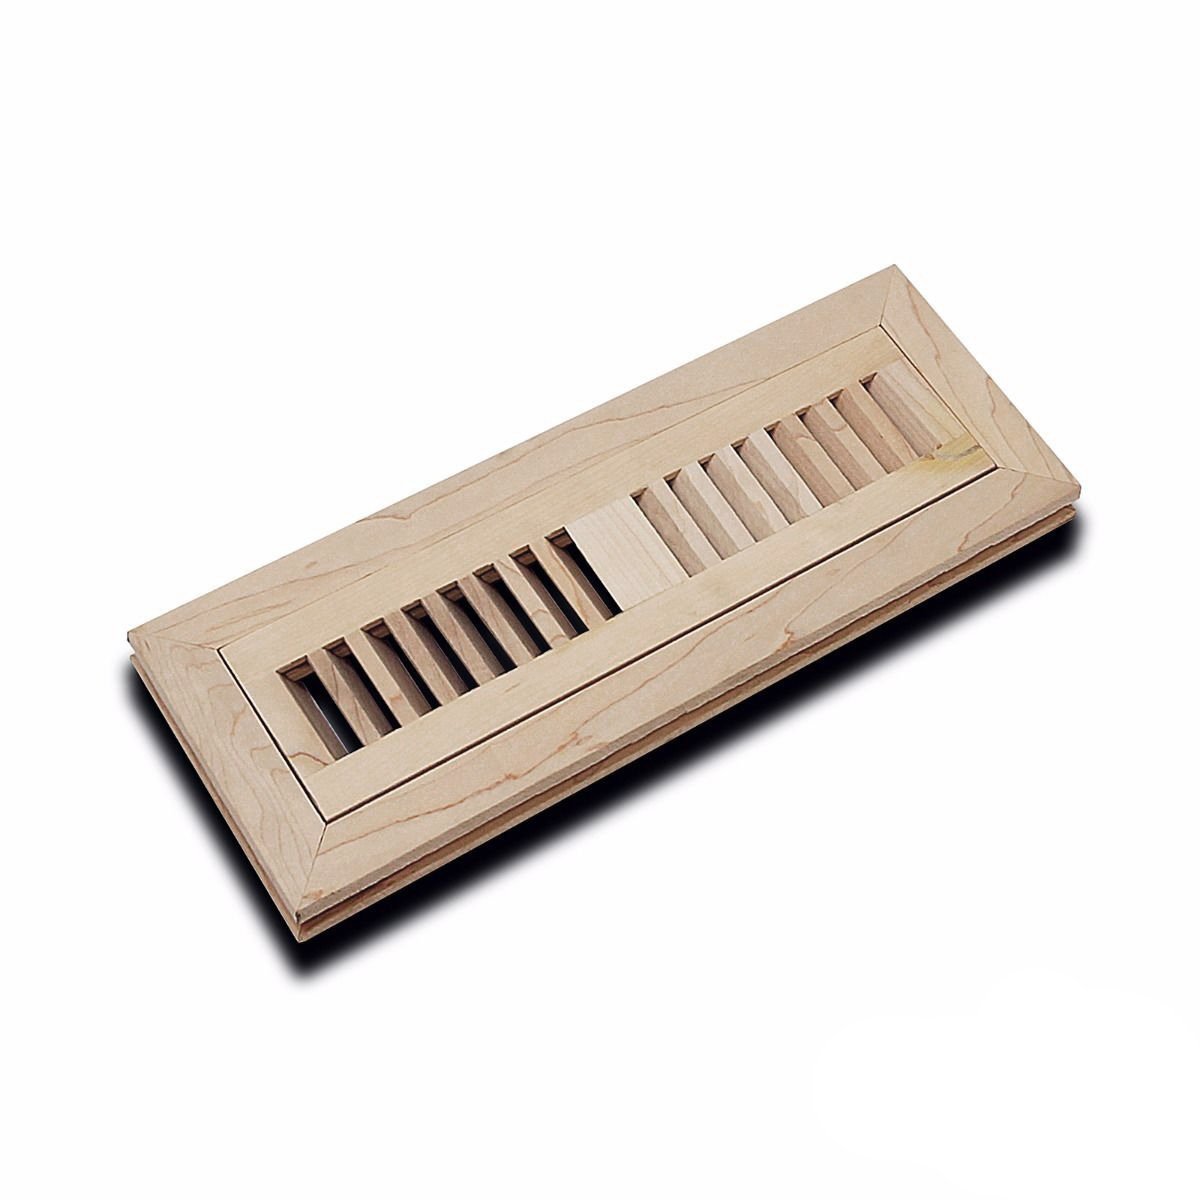 Flush Mount Floor Vent Made From Maple Wood Unfinished Wellandstore